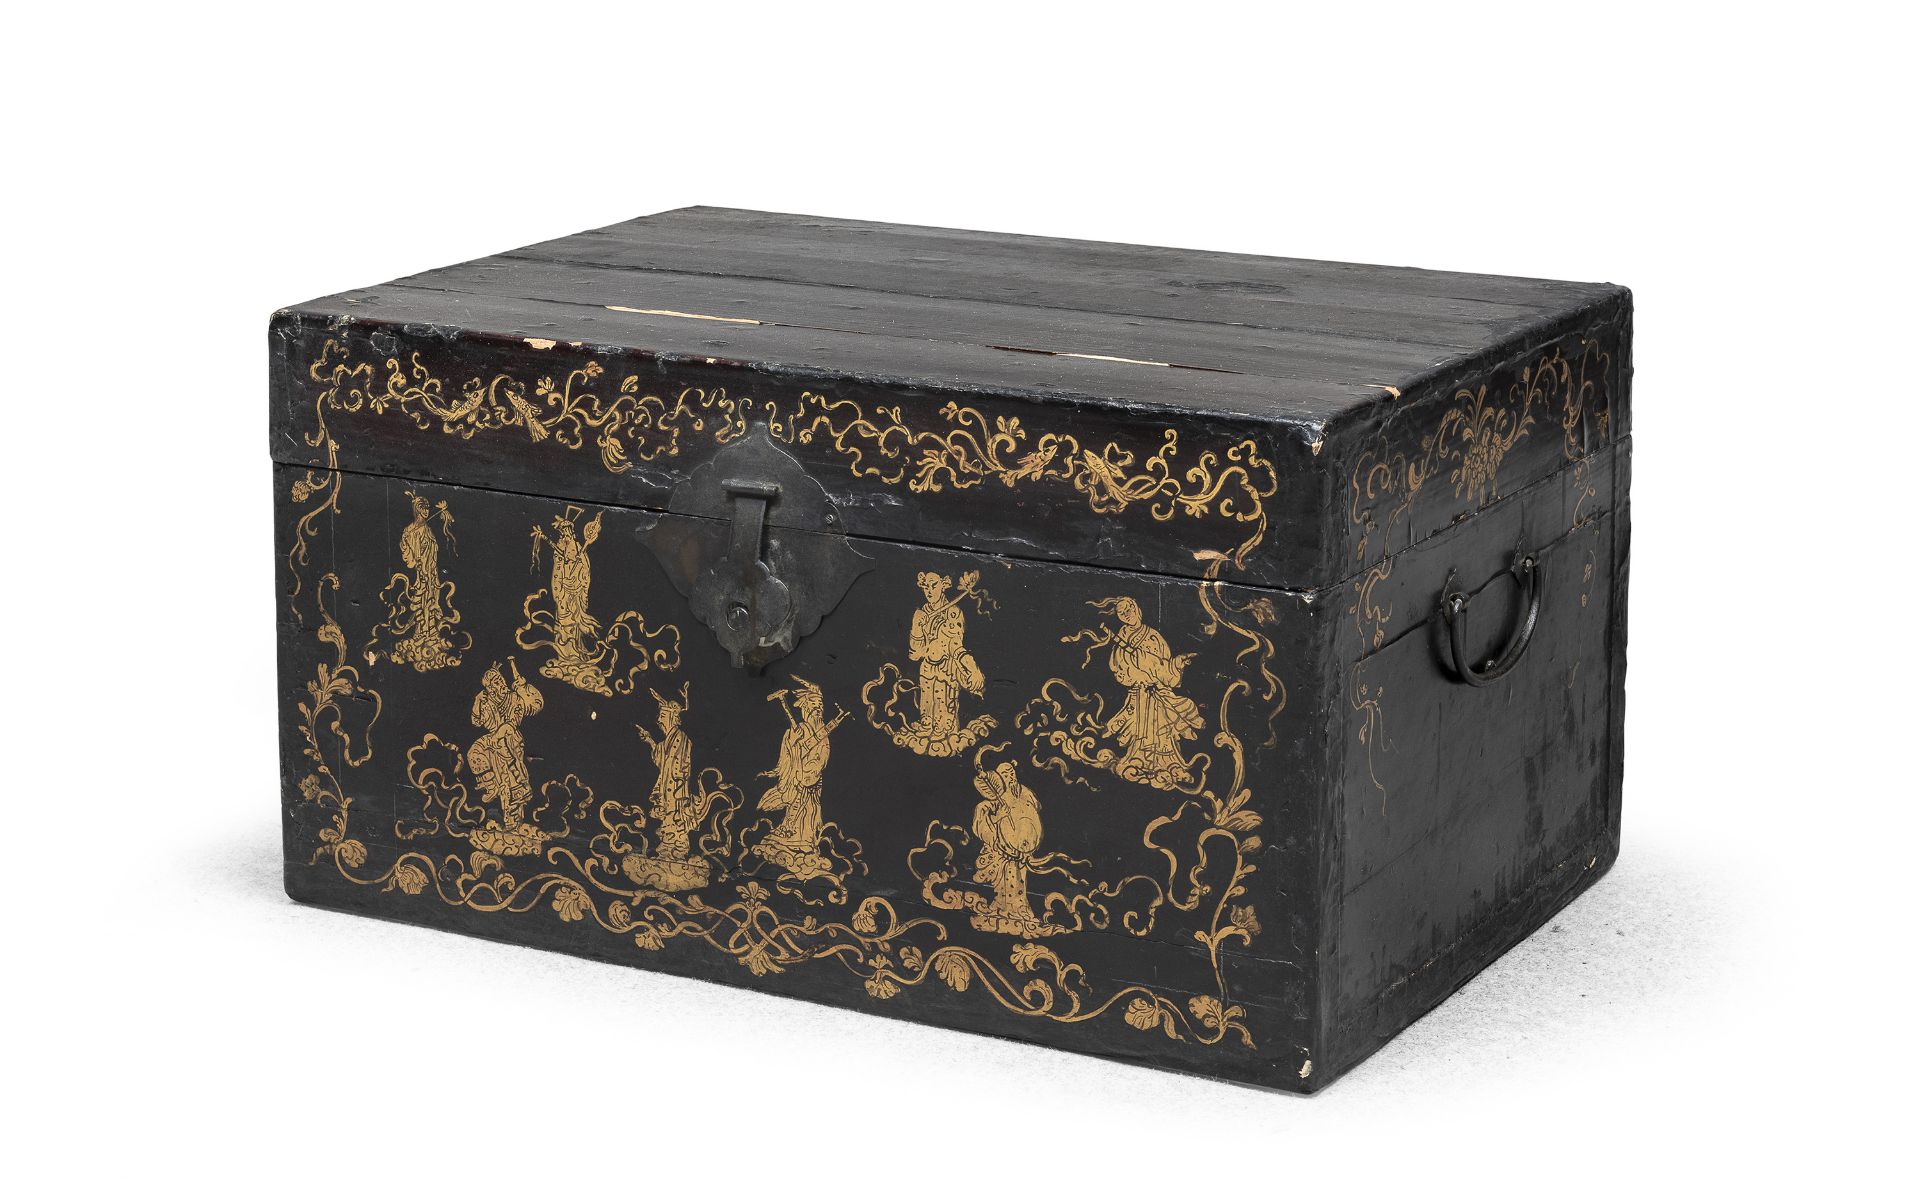 A SMALL CHINESE BLACK LAQUER WOOD TRUNK. 19TH CENTURY.